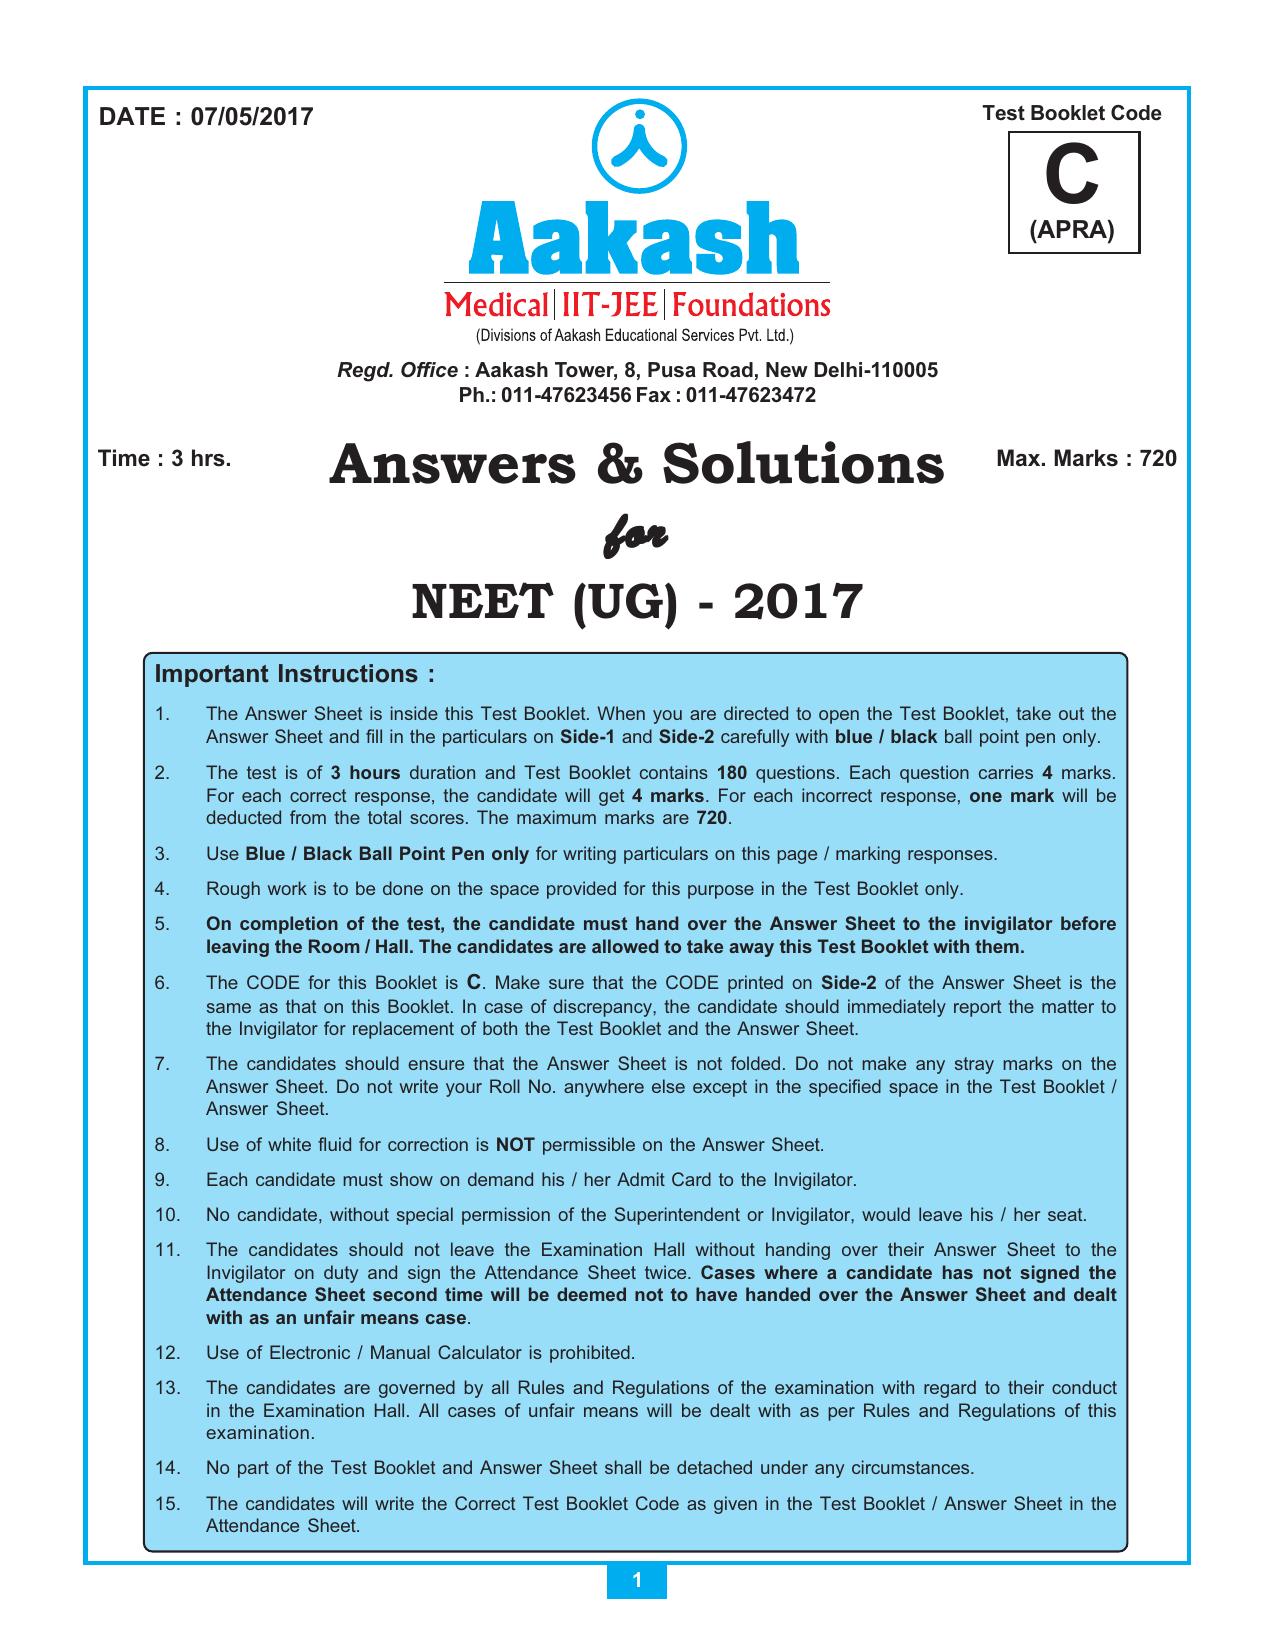  NEET Code C 2017 Answer & Solutions - Page 1